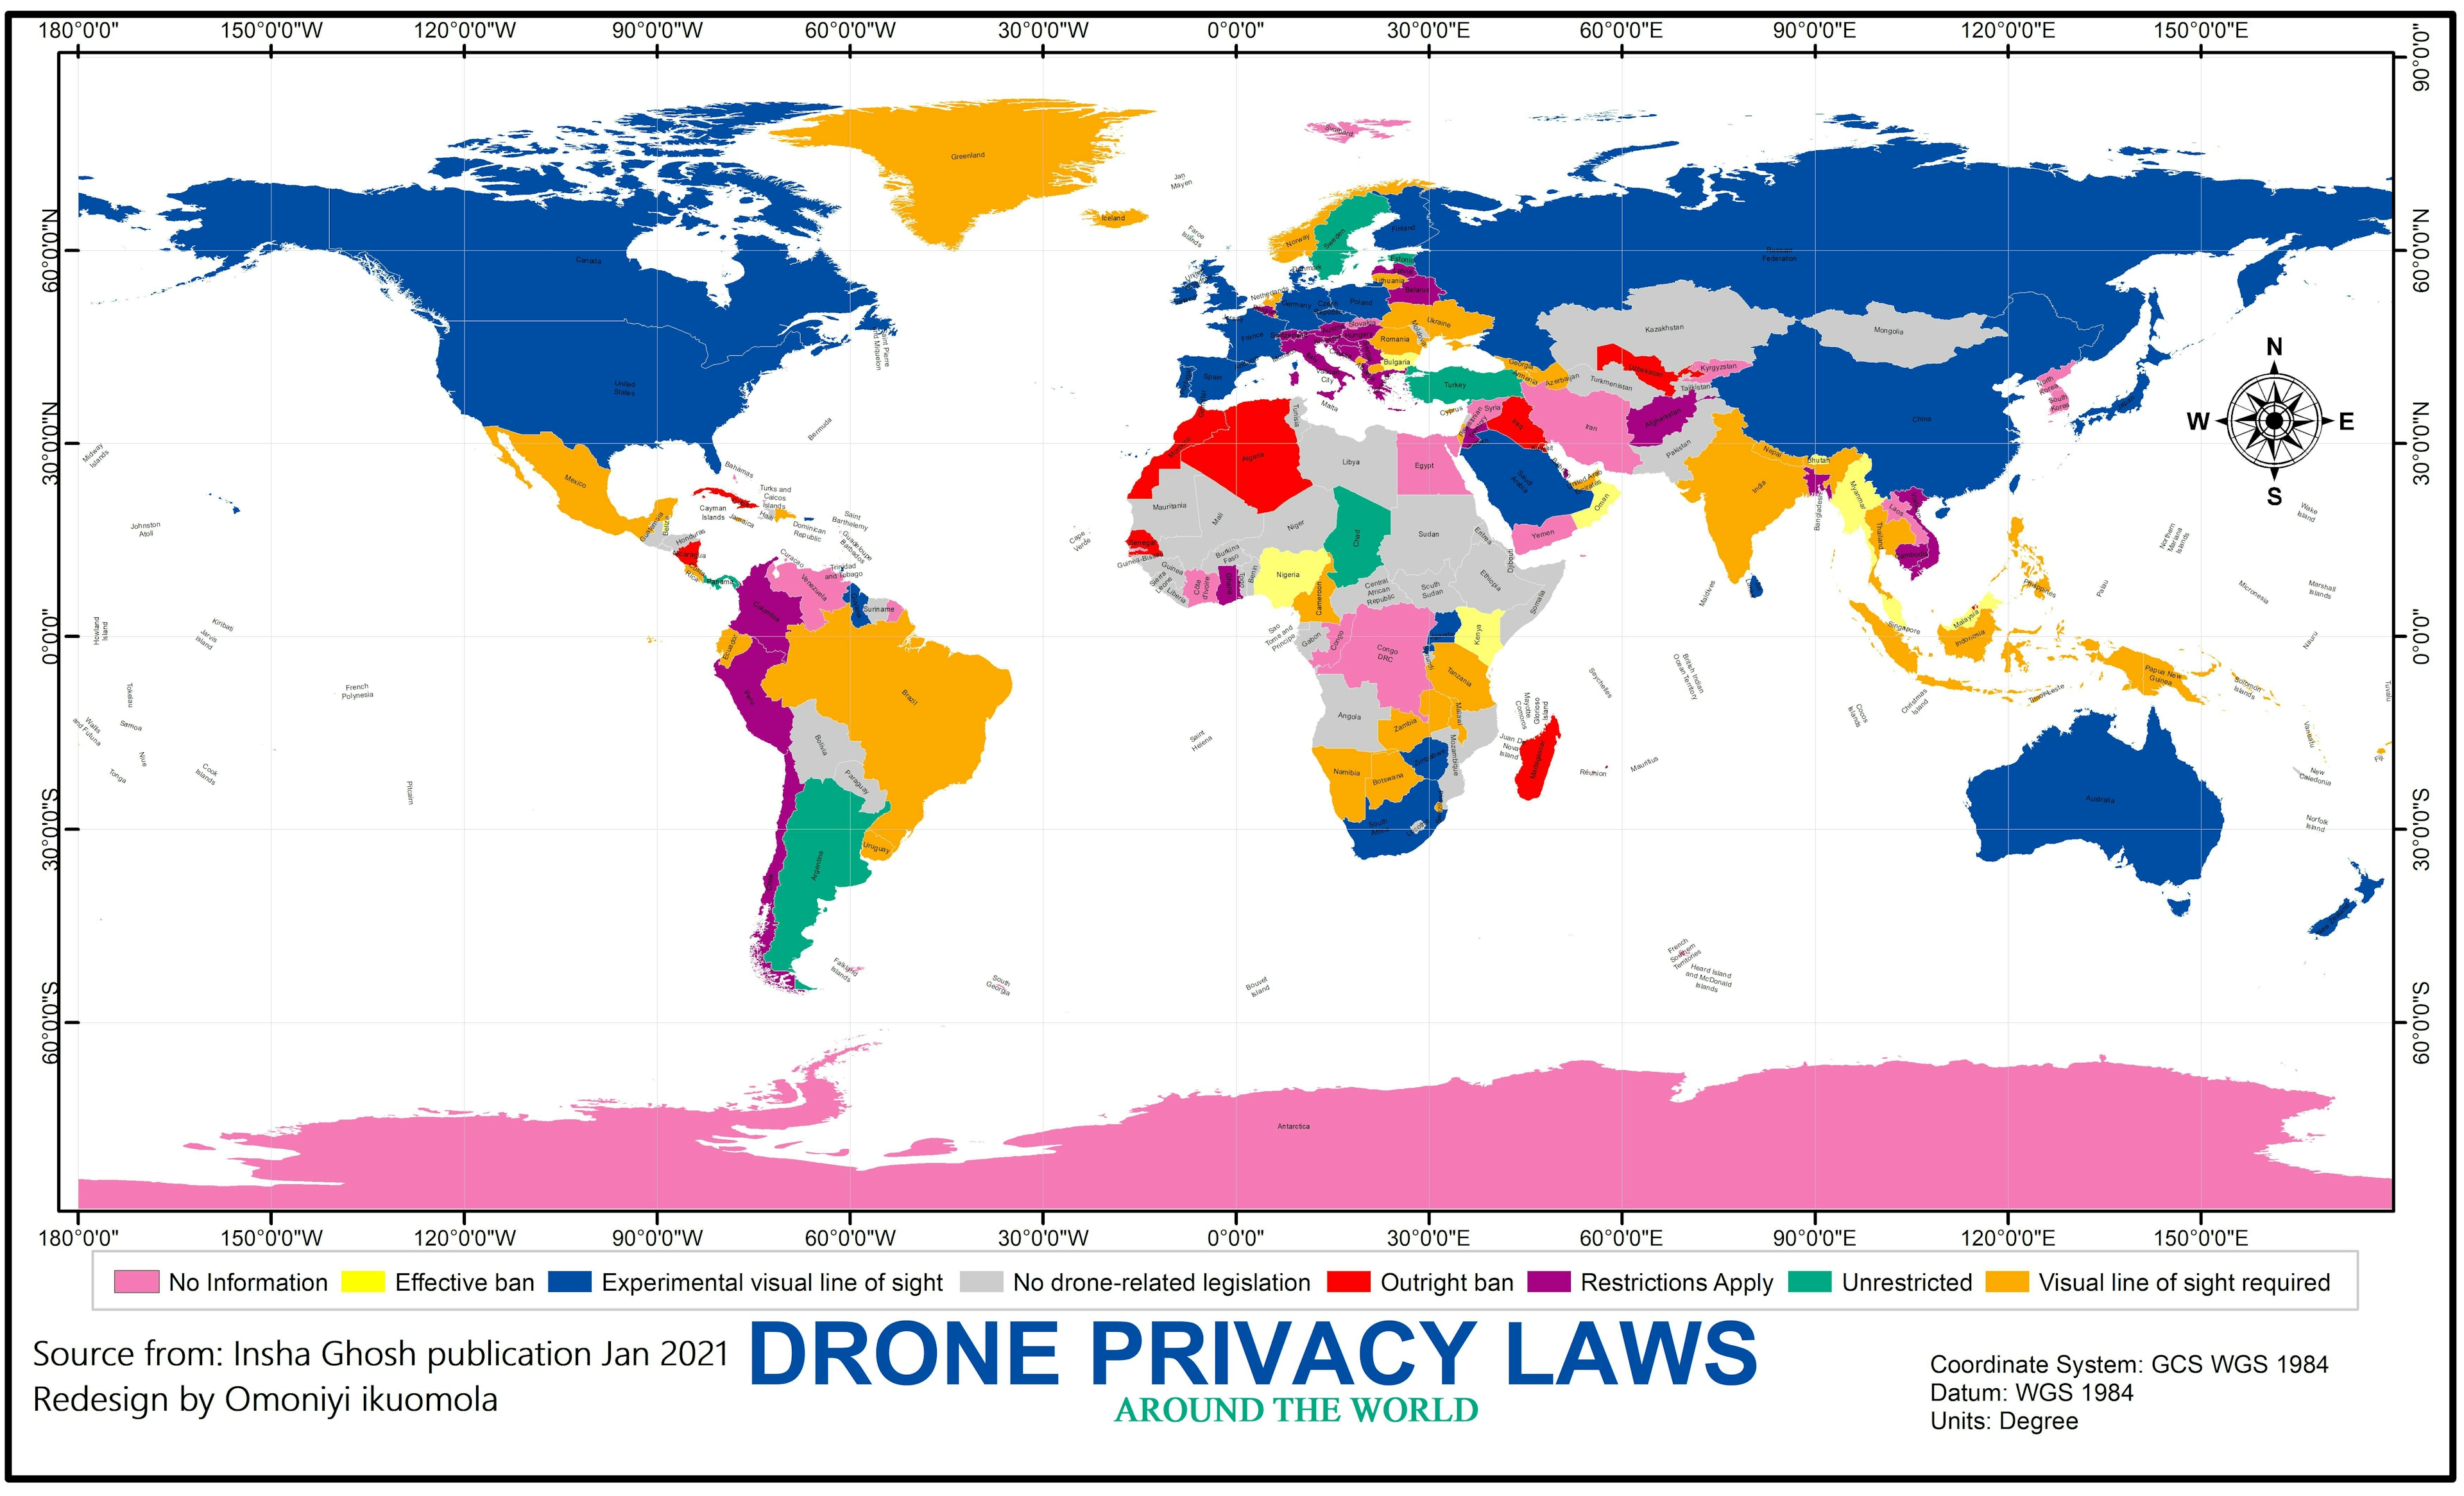 DRONE PRIVACY LAWS IN THE WORLD